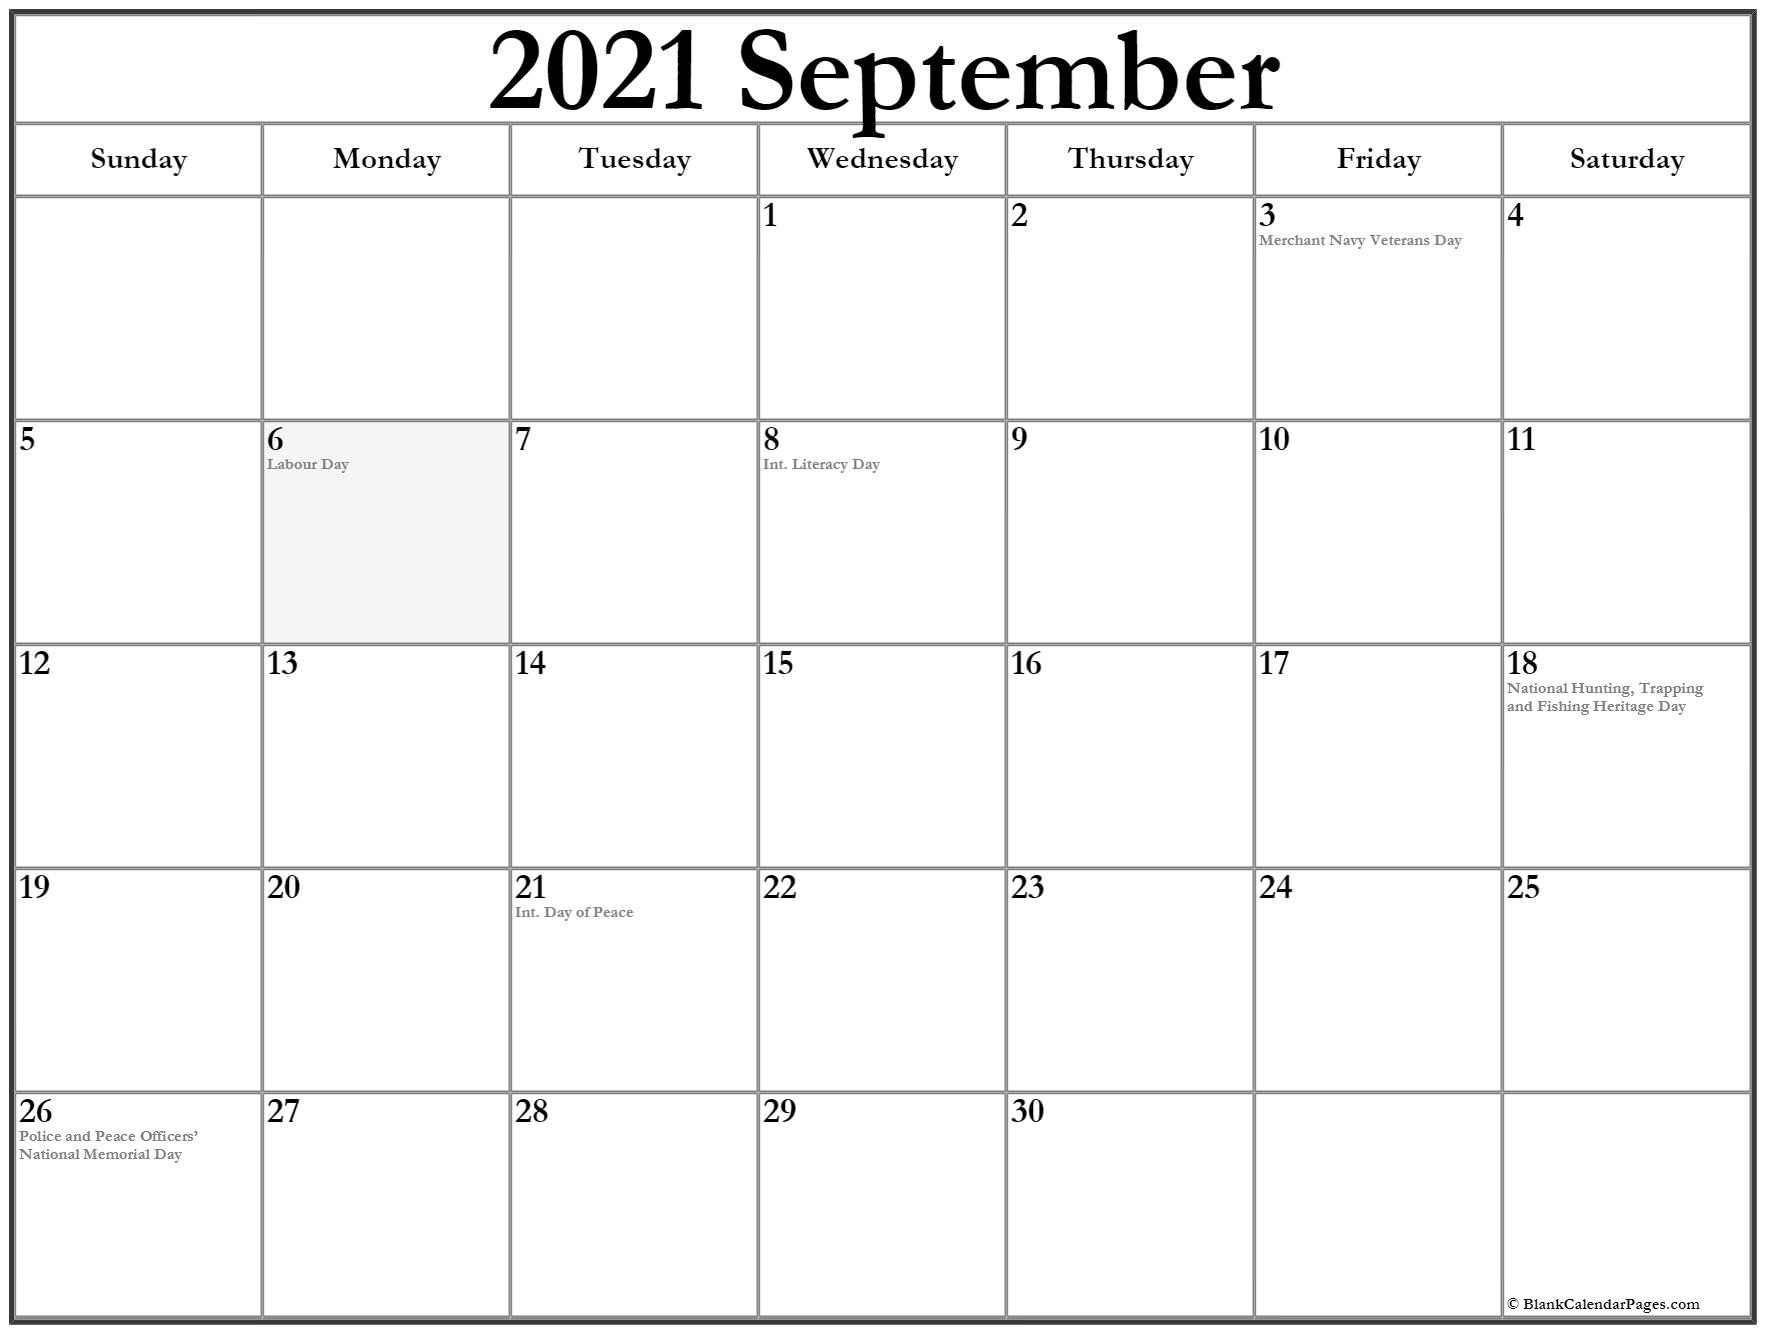 Collection Of September 2021 Calendars With Holidays September 2021 Calendar With Holidays Usa